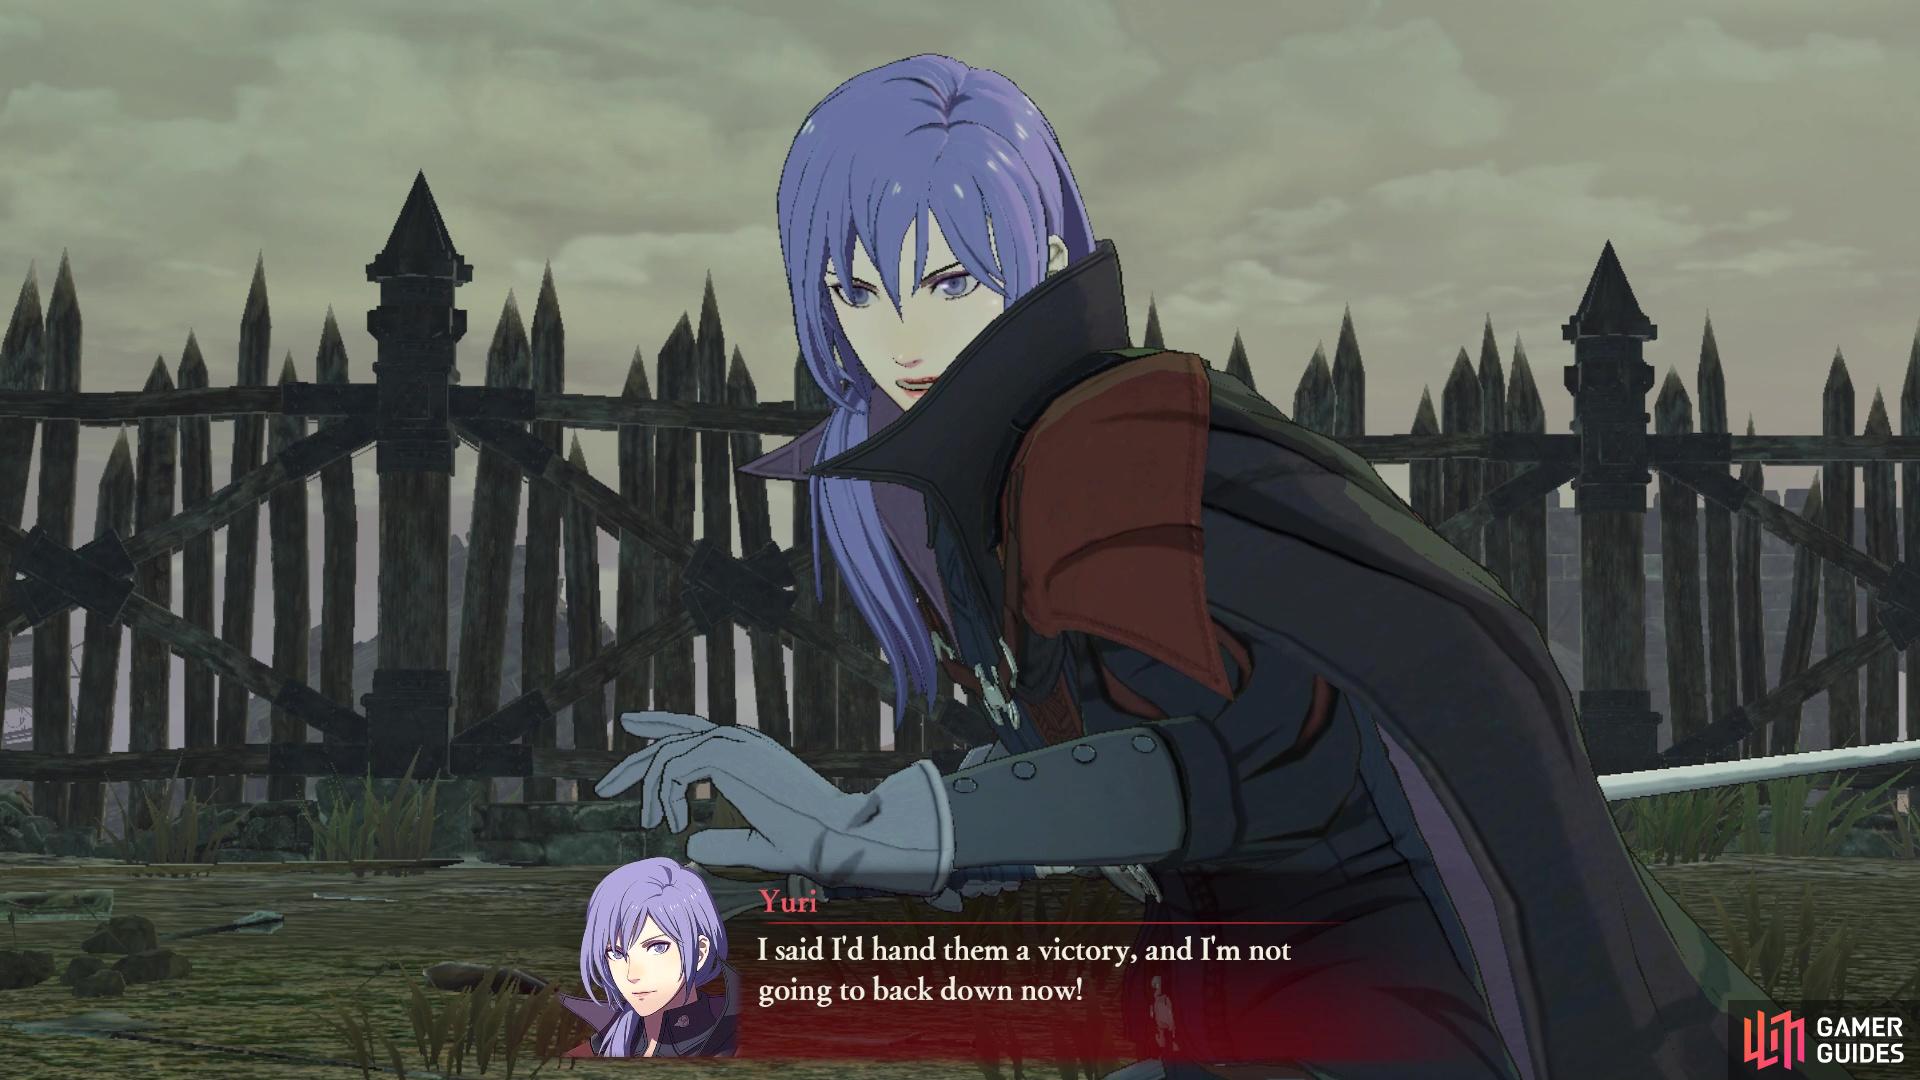 Yuri has no relation in actually recruiting Byleth